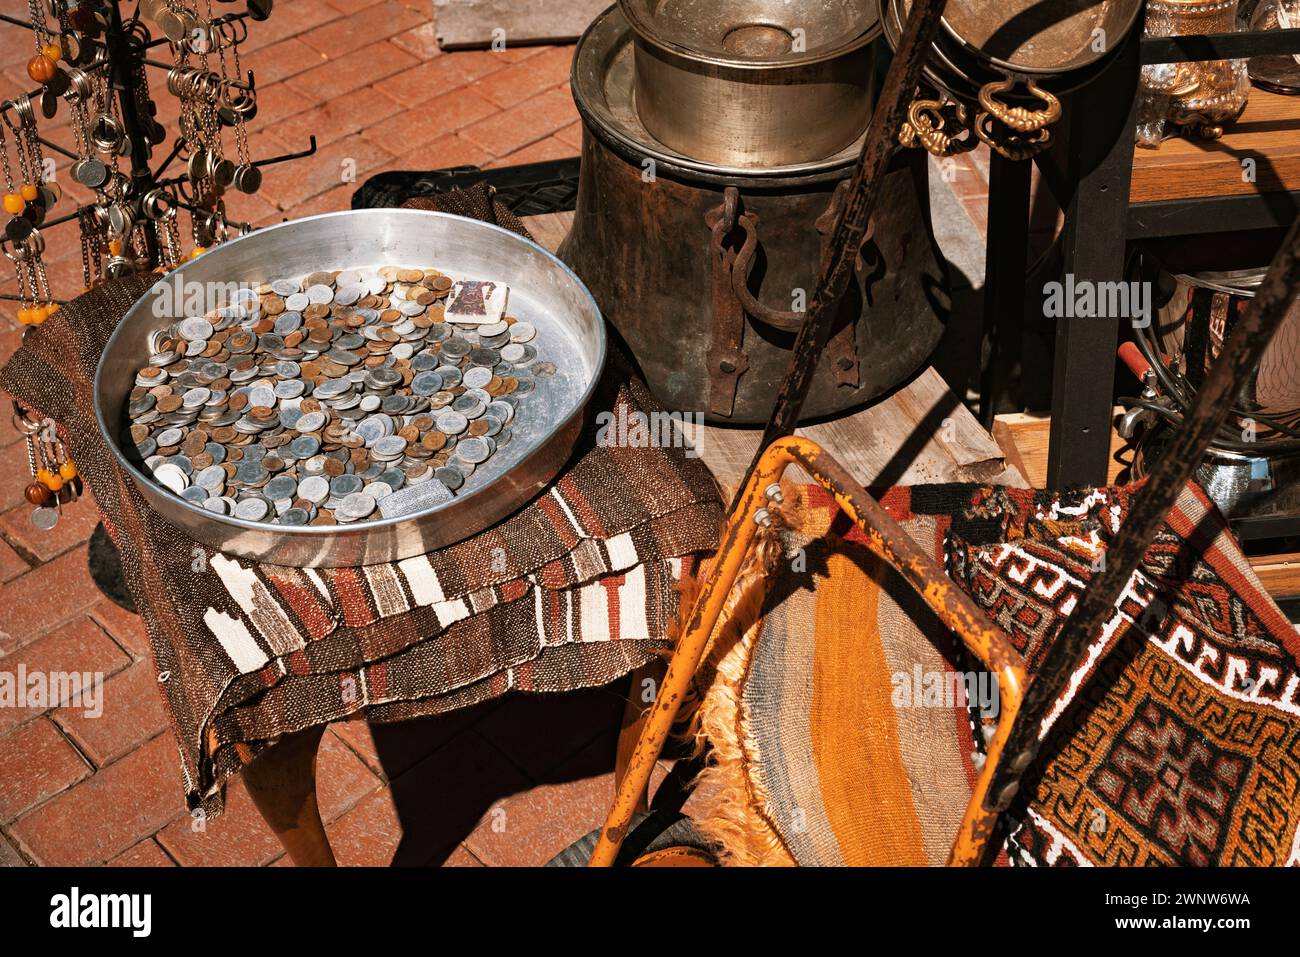 Vintage coins in a metal tray, rusty old cauldron and pots, key chains, rug and other goods in a shop at bazaar. Stock Photo